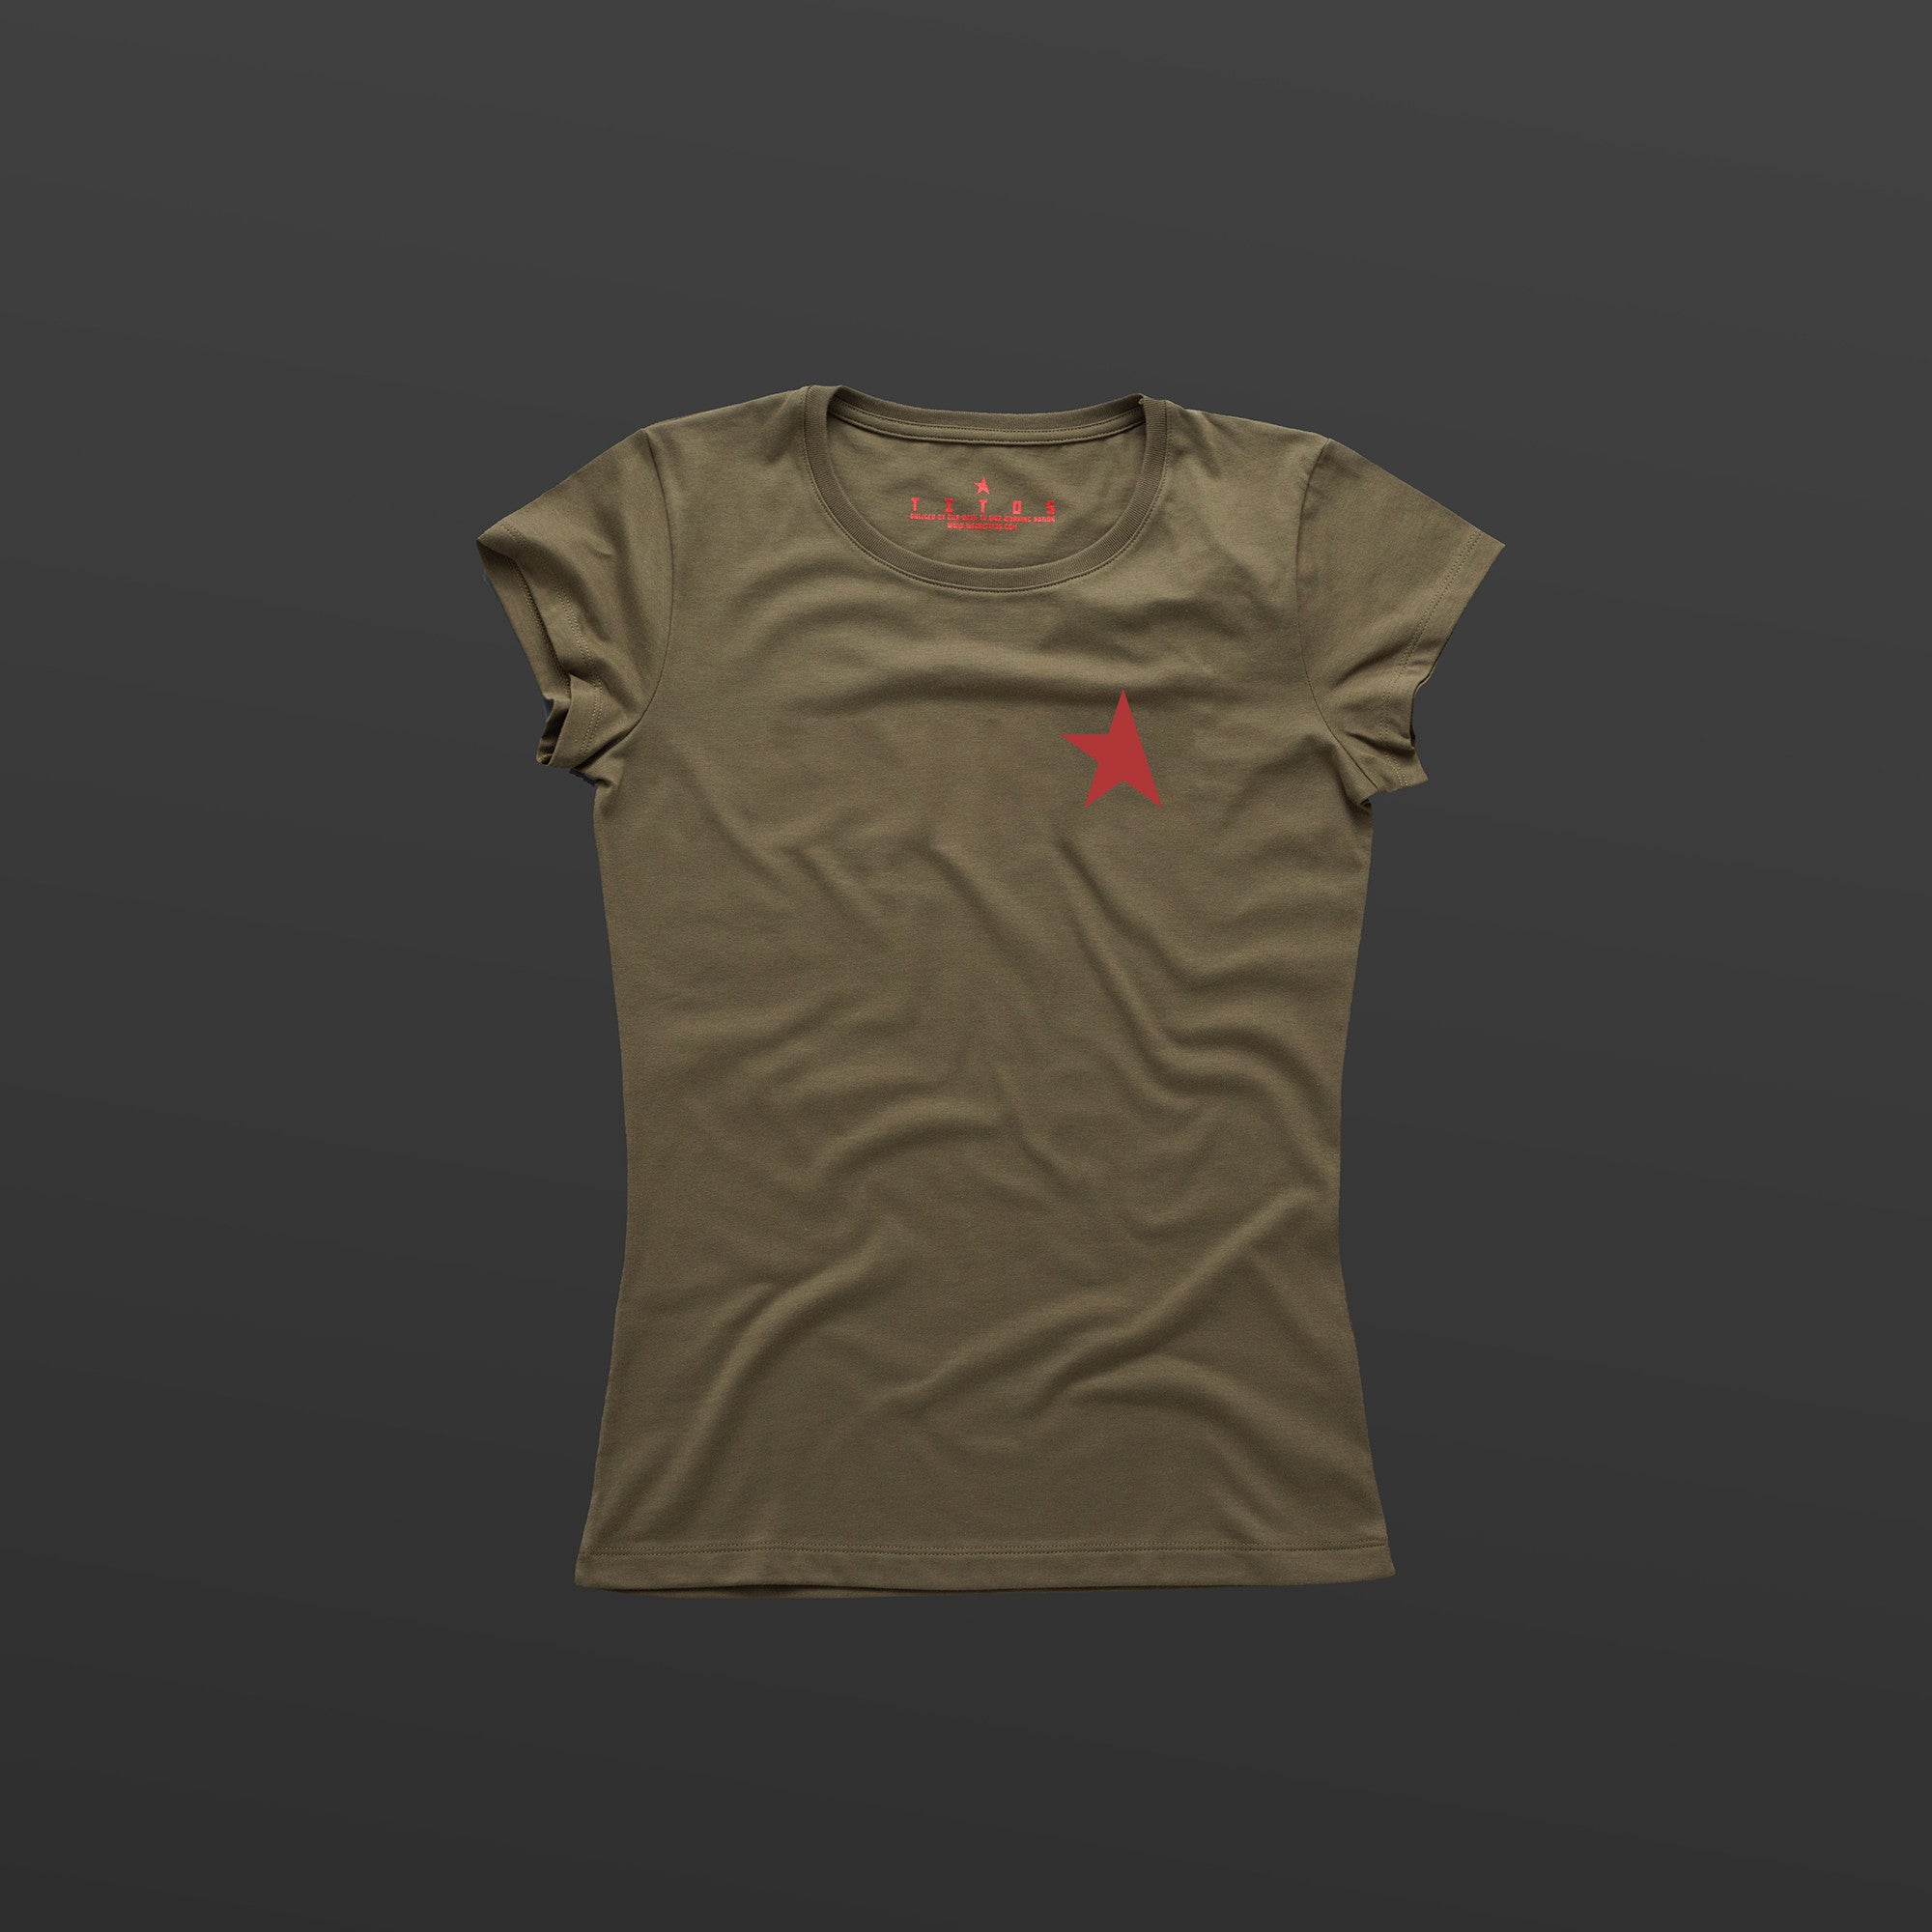 8th women's TITOS t-shirt olive/red small star logo